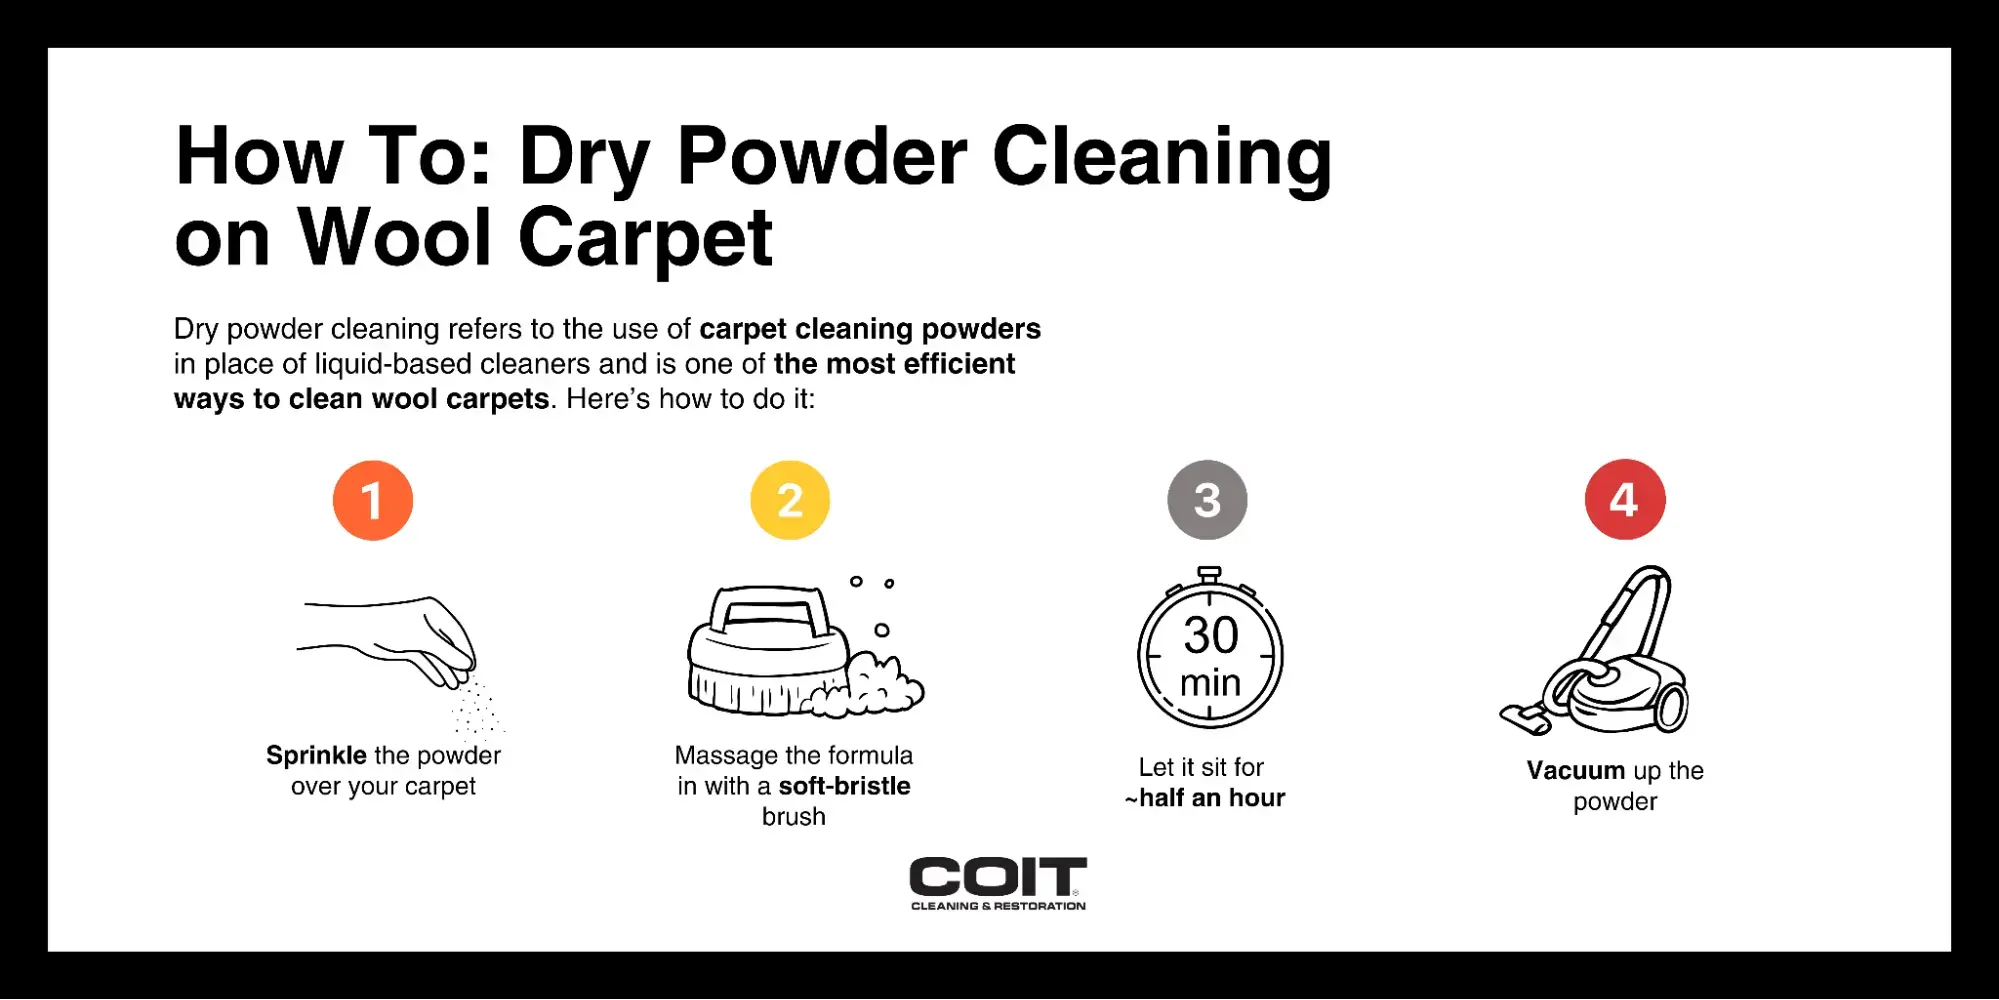 Dry powder cleaning on wool carpet